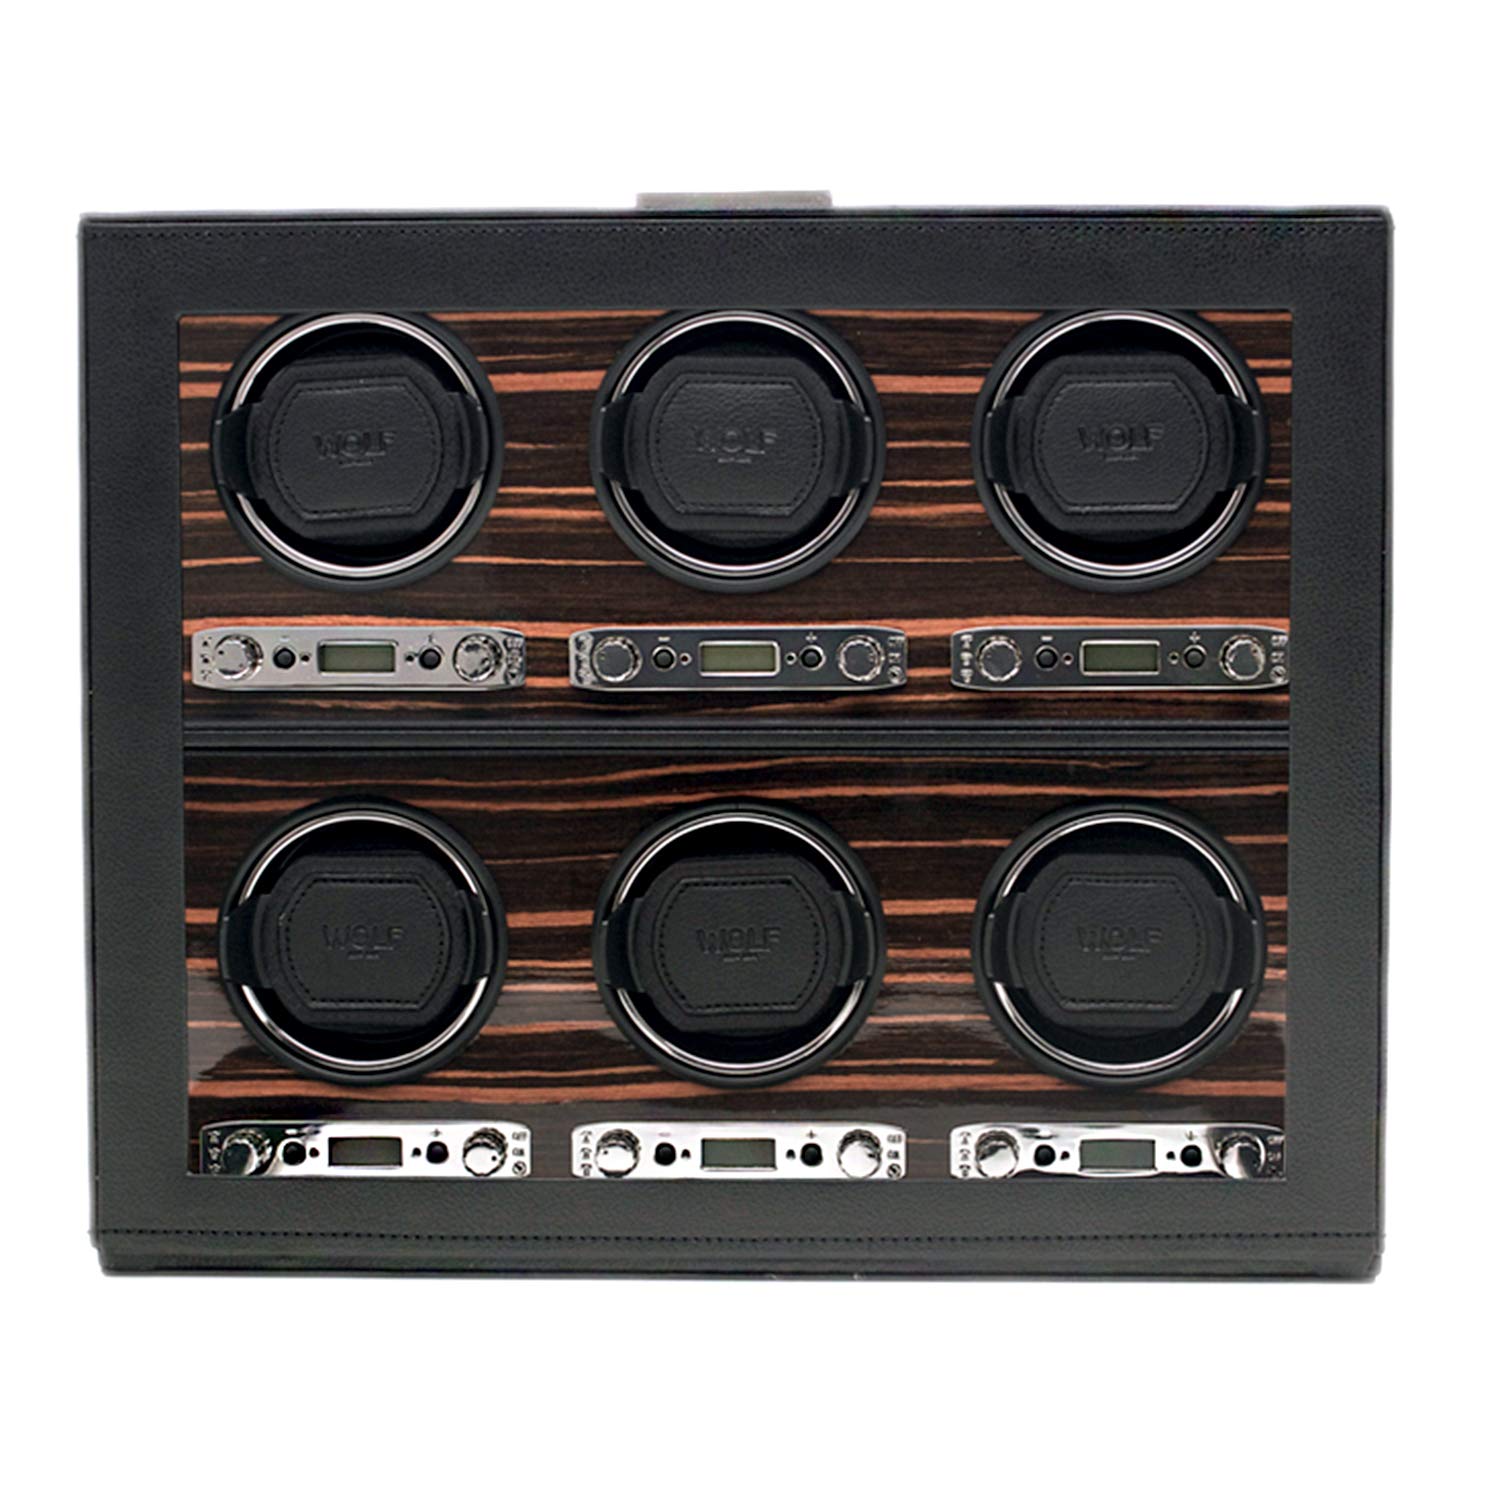 WOLF 459256 Roadster 6 Piece Watch Winder with Cover, Black